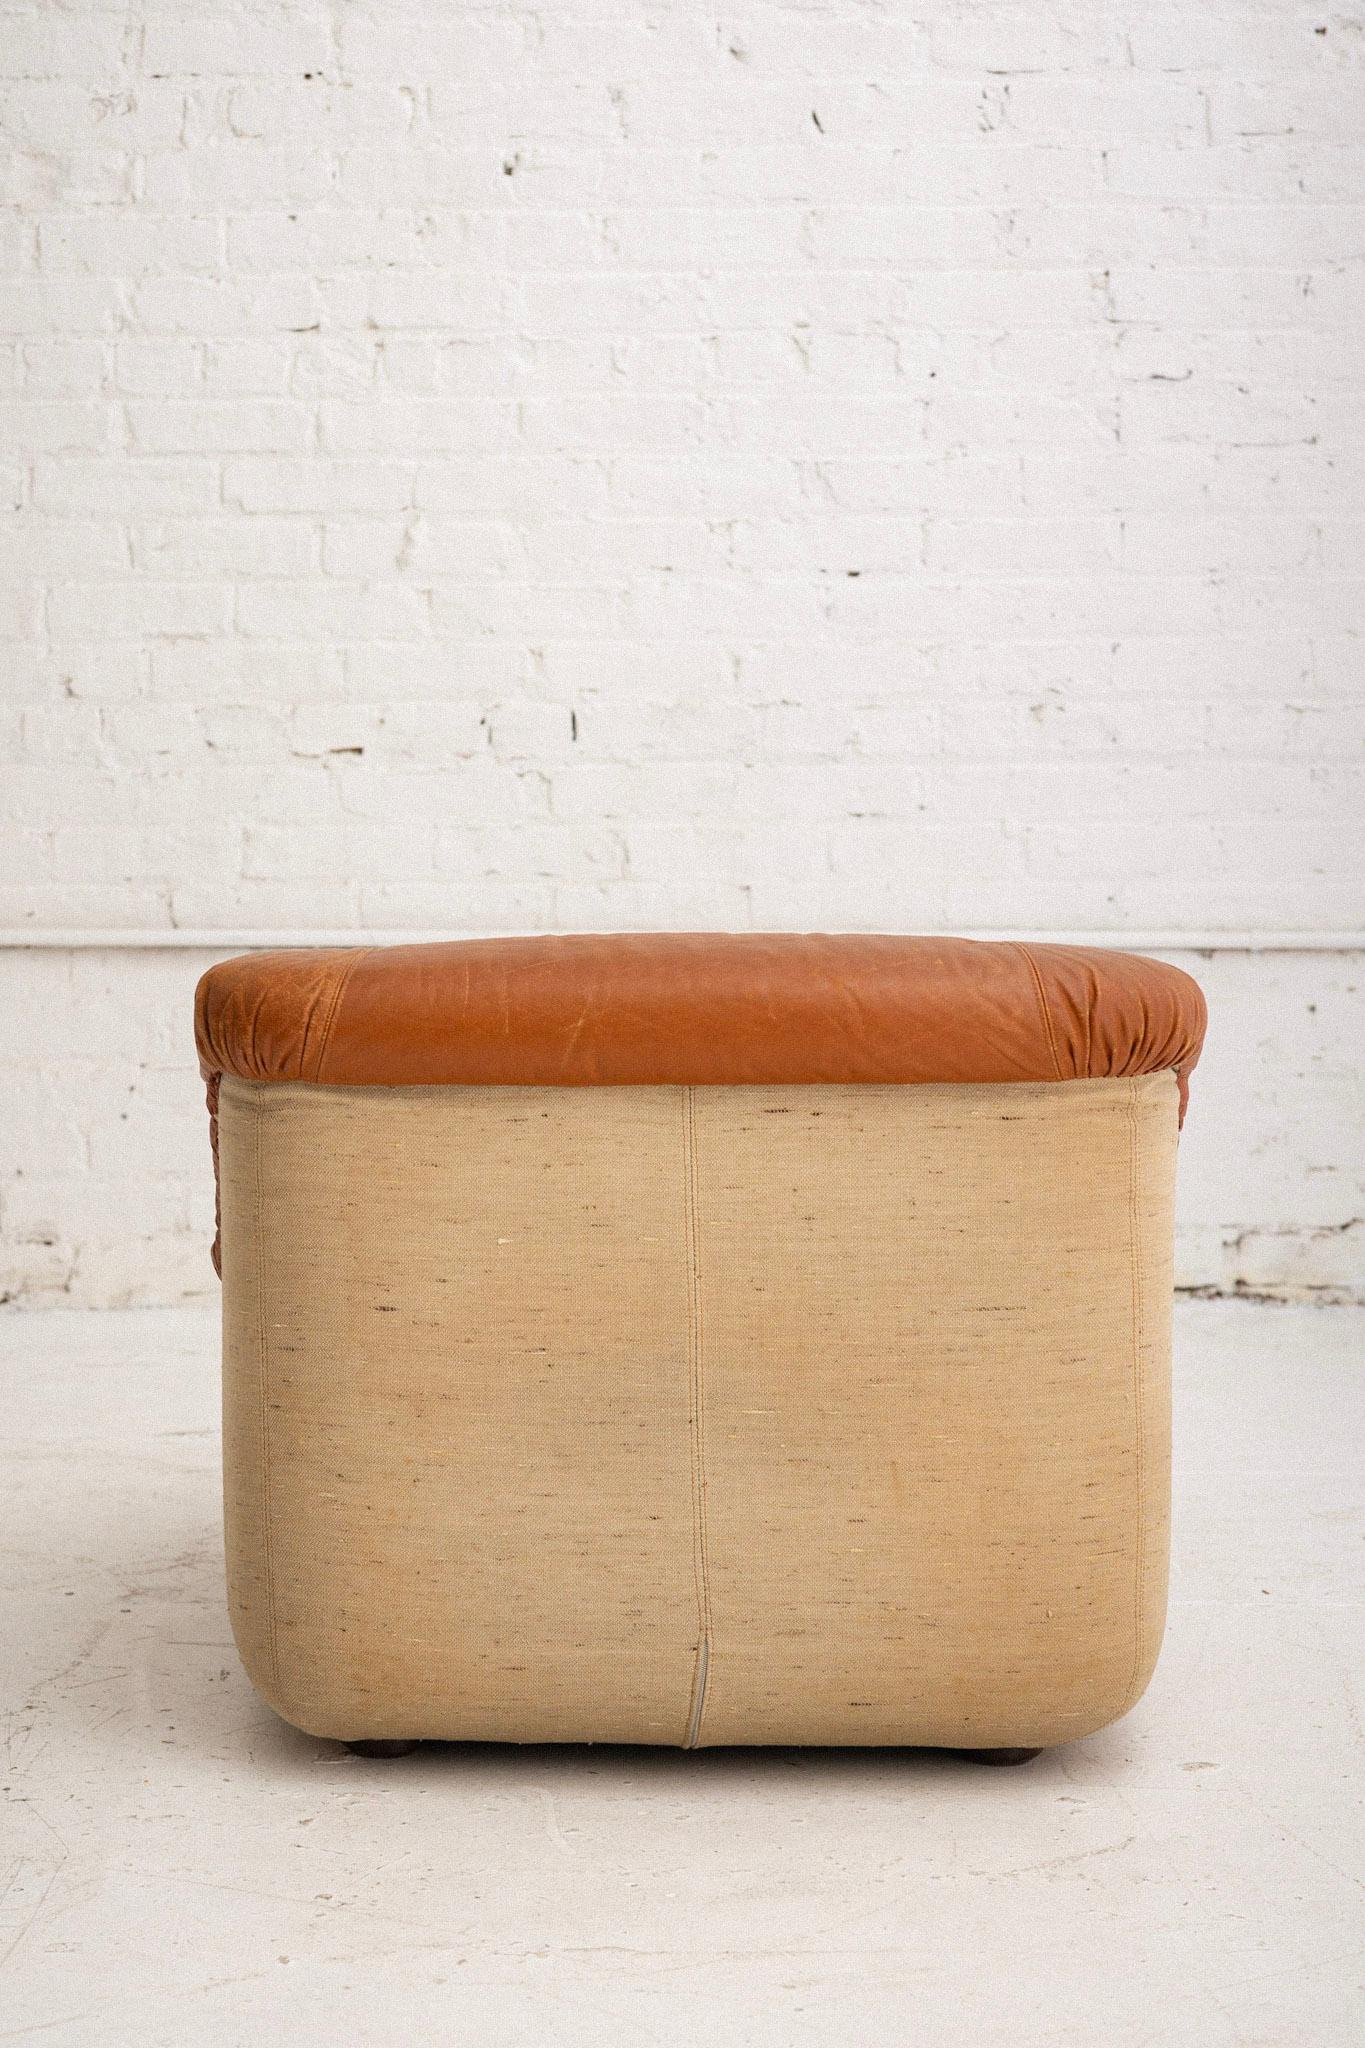 Henning Korch for Swan ‘Caprice’ Leather Chair / Modular Seating In Fair Condition For Sale In Brooklyn, NY